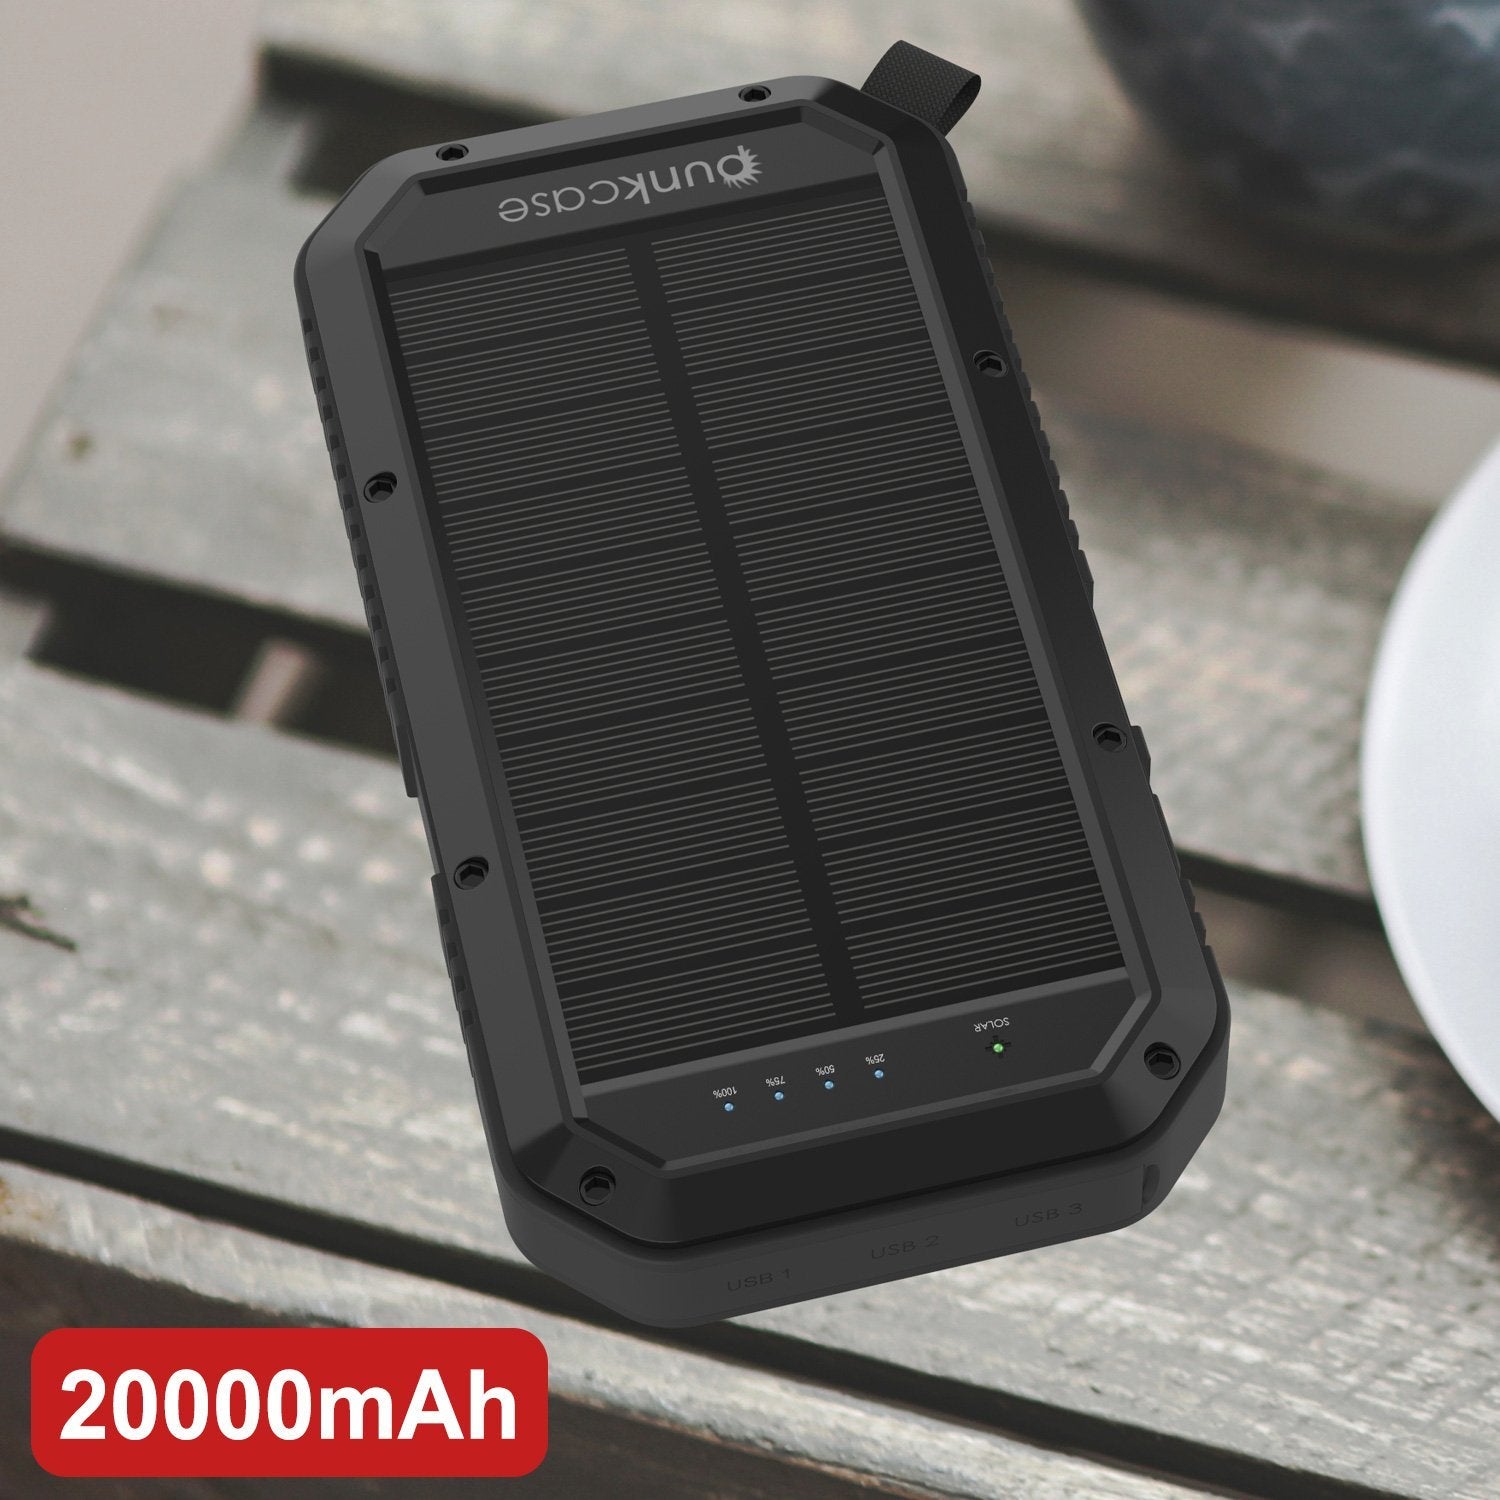 PunkCase Solar Wireless PowerBank 20000 mAh Battery Pack for iPhone 15/14/13/12/11/X & Wireless, iPad, Samsung Galaxy S24/23/22/21/10/9 and Many More [Black]